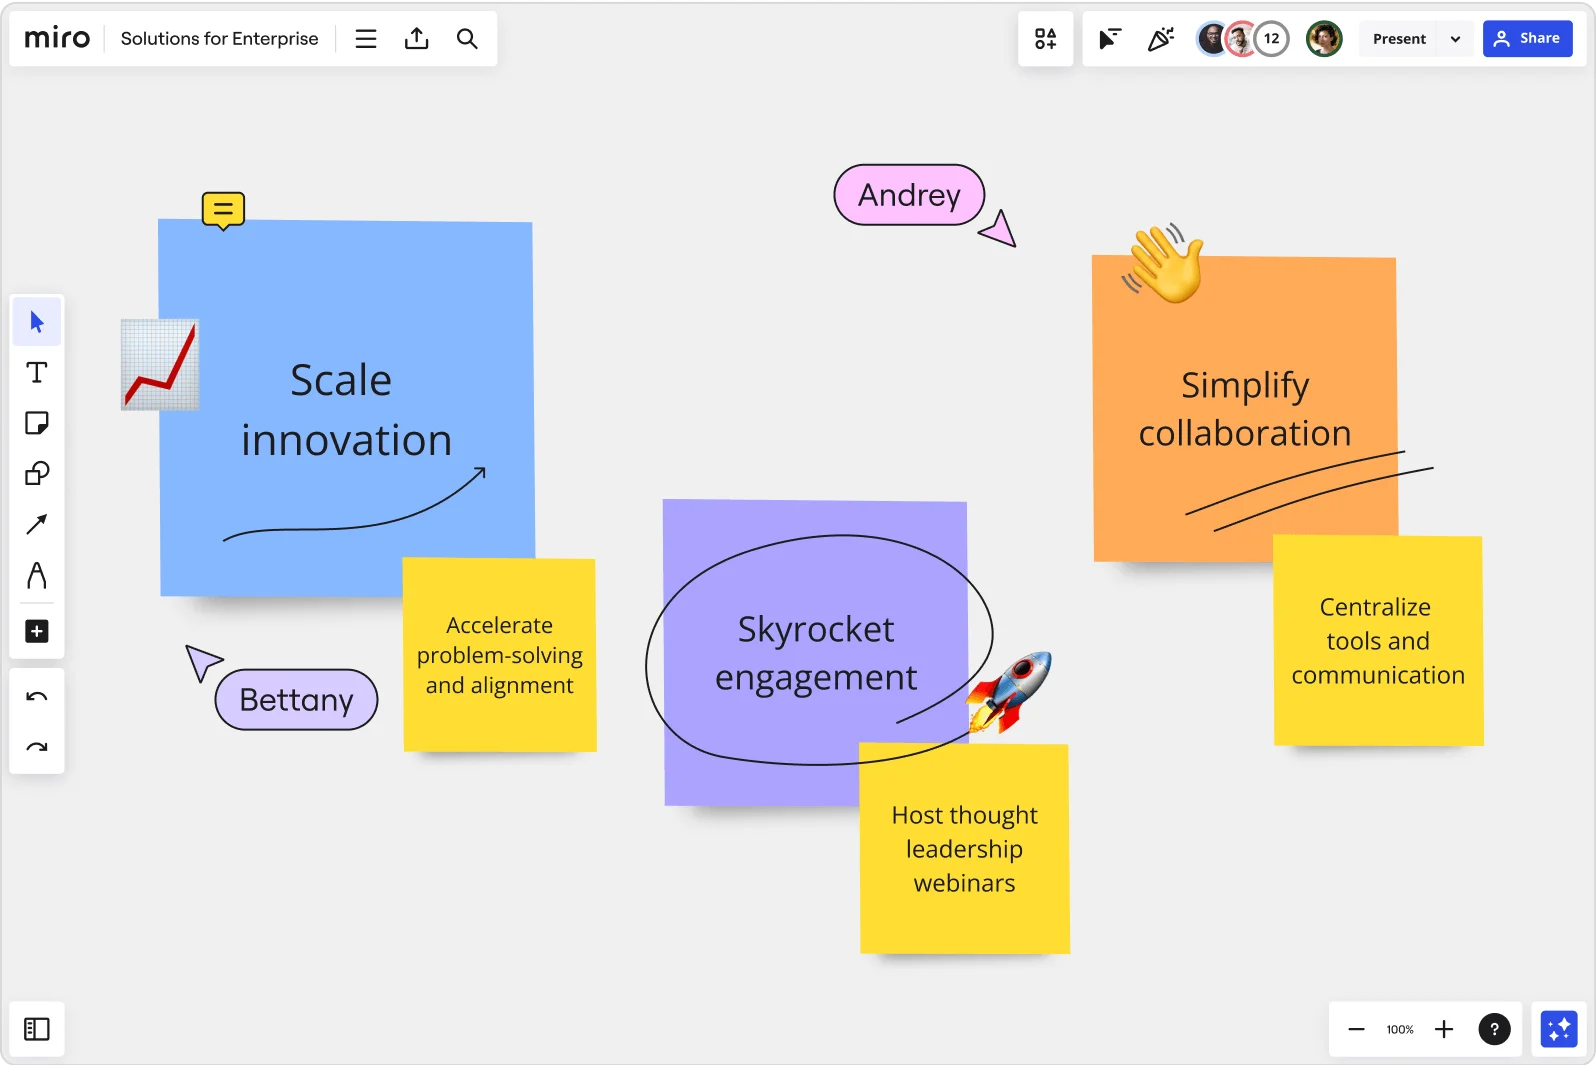 An image showing how easy it is to use and customize sticky notes in Miro's concept map maker